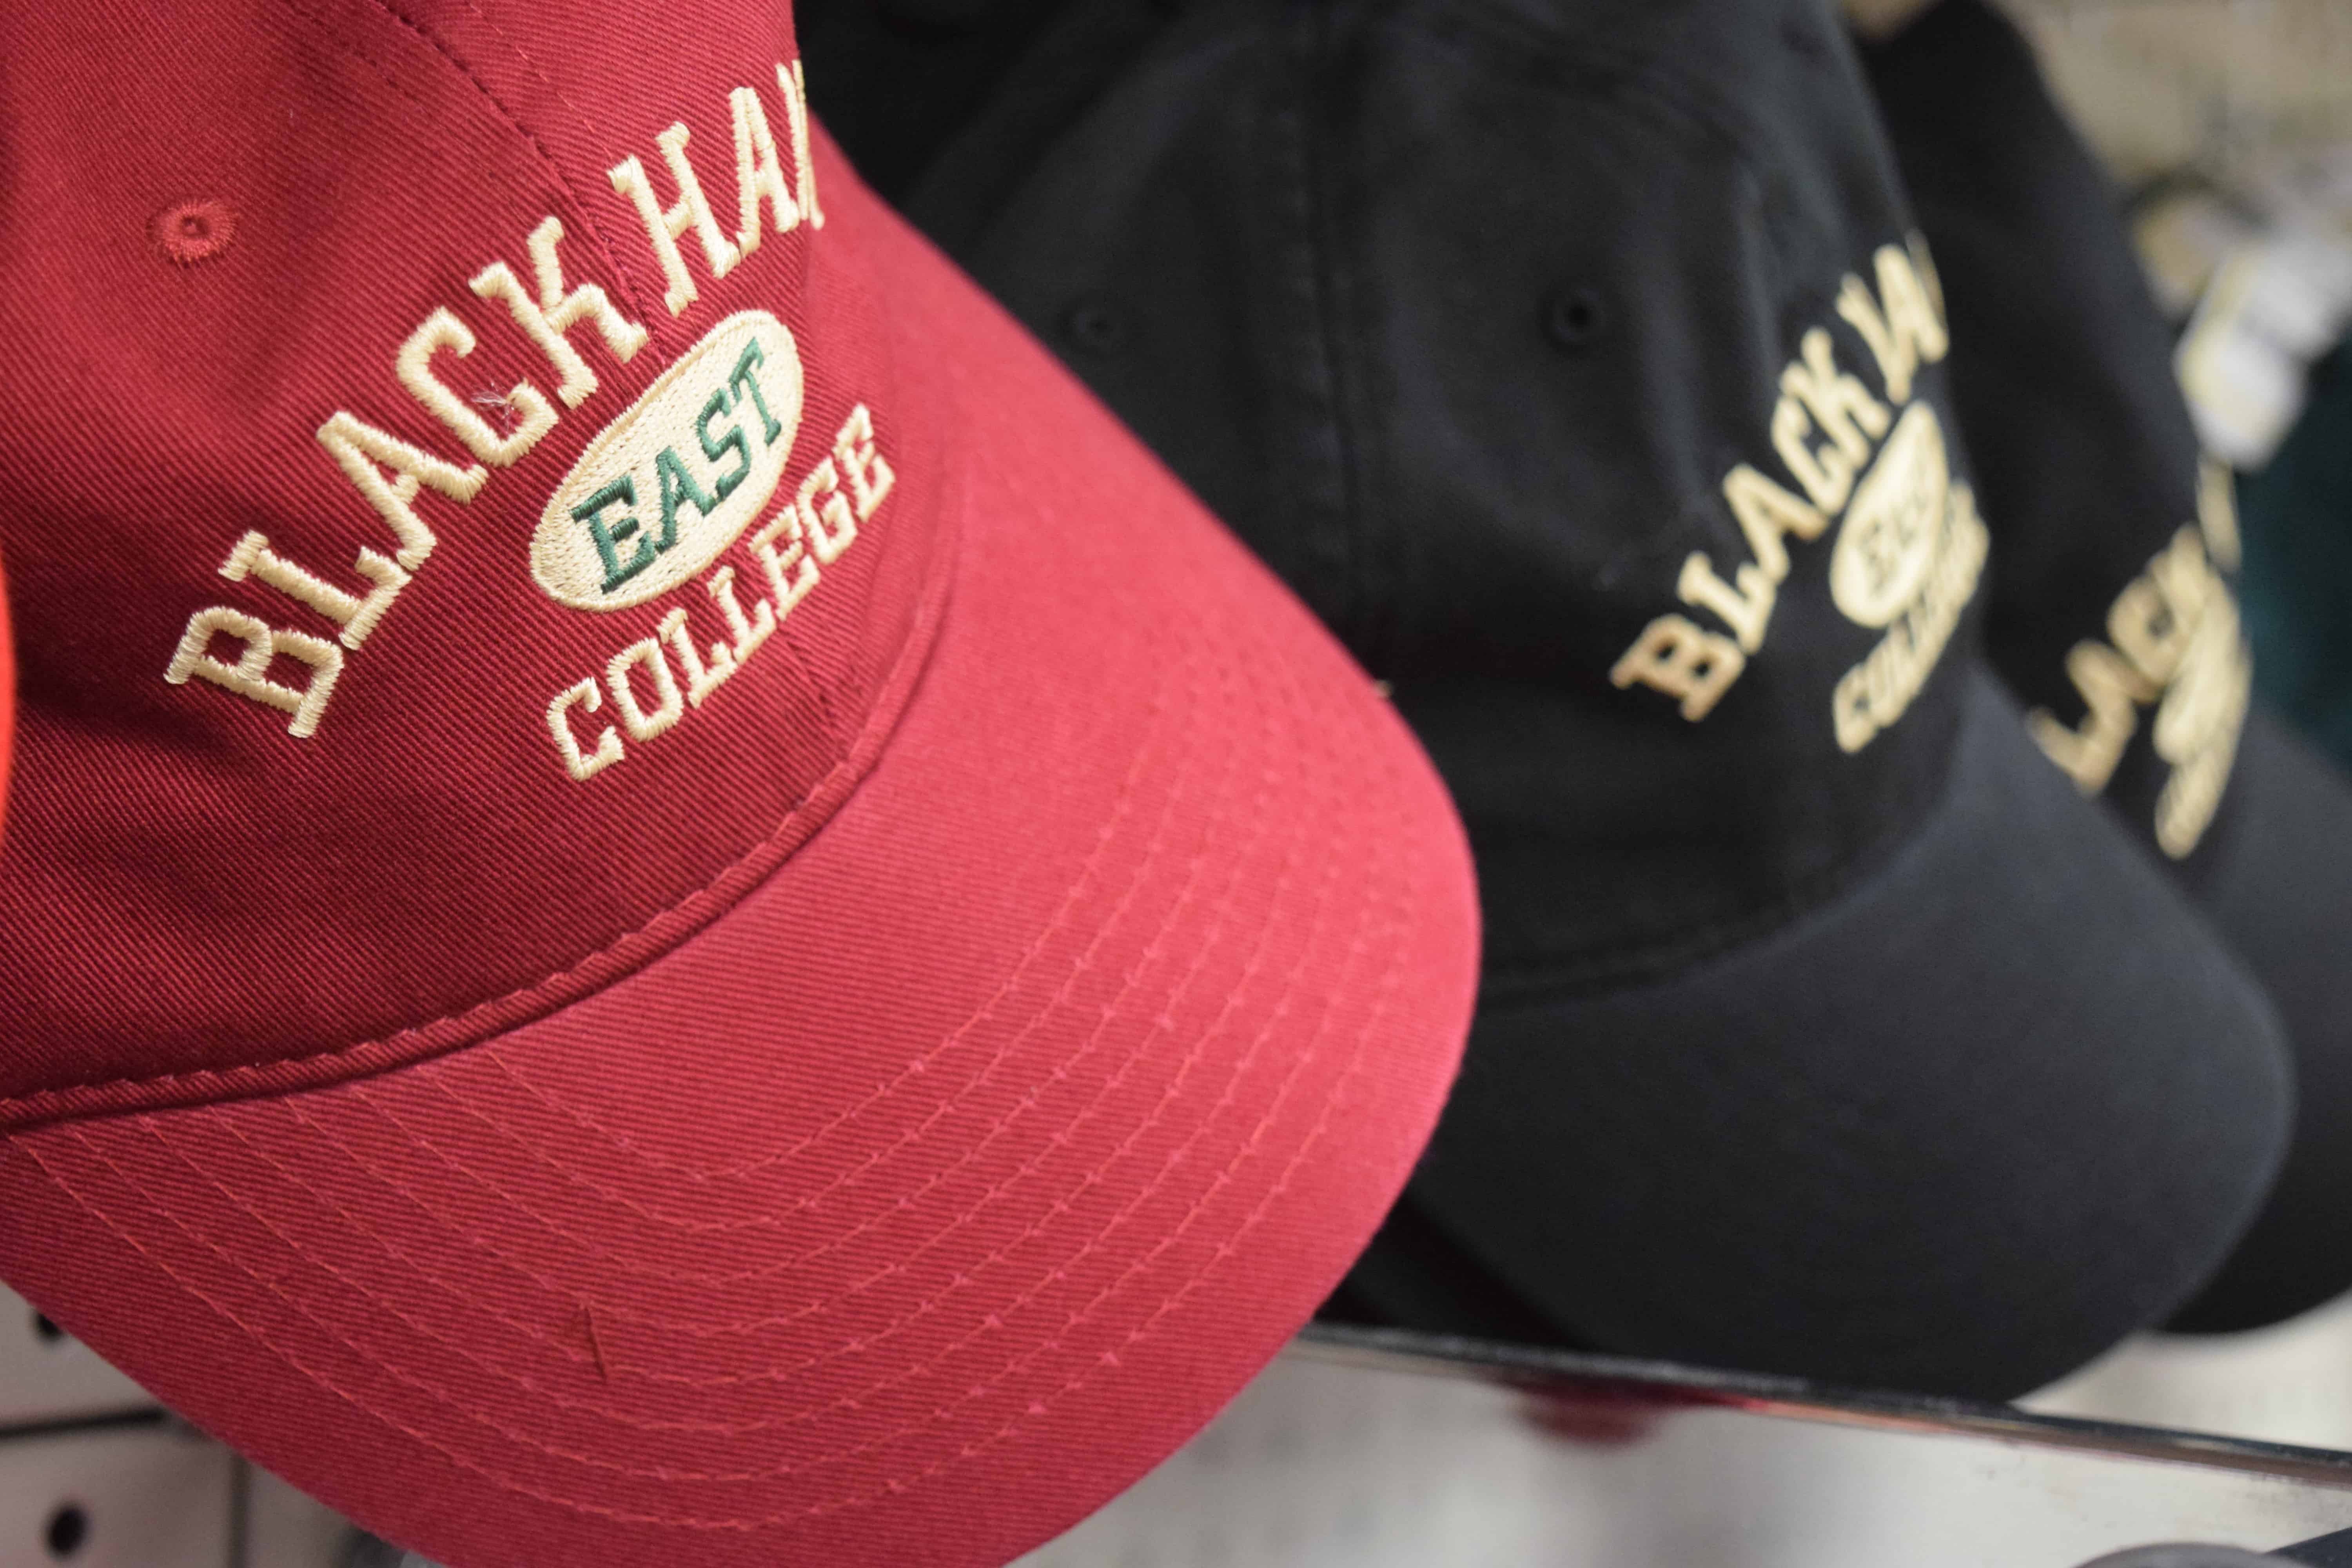 black hawk college hats in East Campus Bookstore